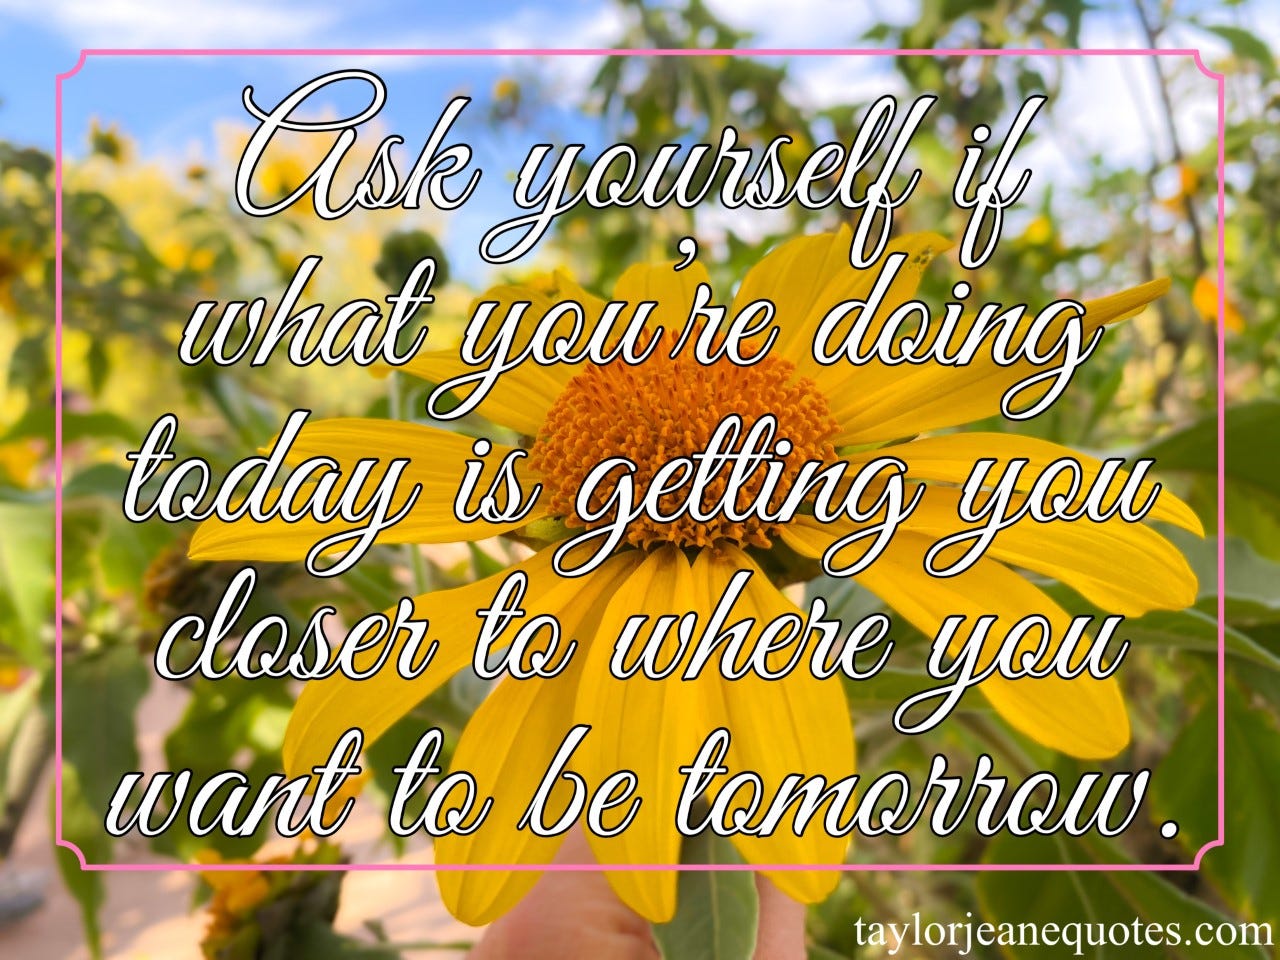 taylor jeane quotes, taylor jeane, taylor wilson, inspirational quotes, motivational quotes, quote of the day, motivational daily quotes, question quotes, goal quotes, success quotes, progress quotes, growth quotes, thought provoking quotes, today quotes, tomorrow quotes, ask yourself if what you're doing today is getting you closer to where you want to be tomorrow quote, sunflower